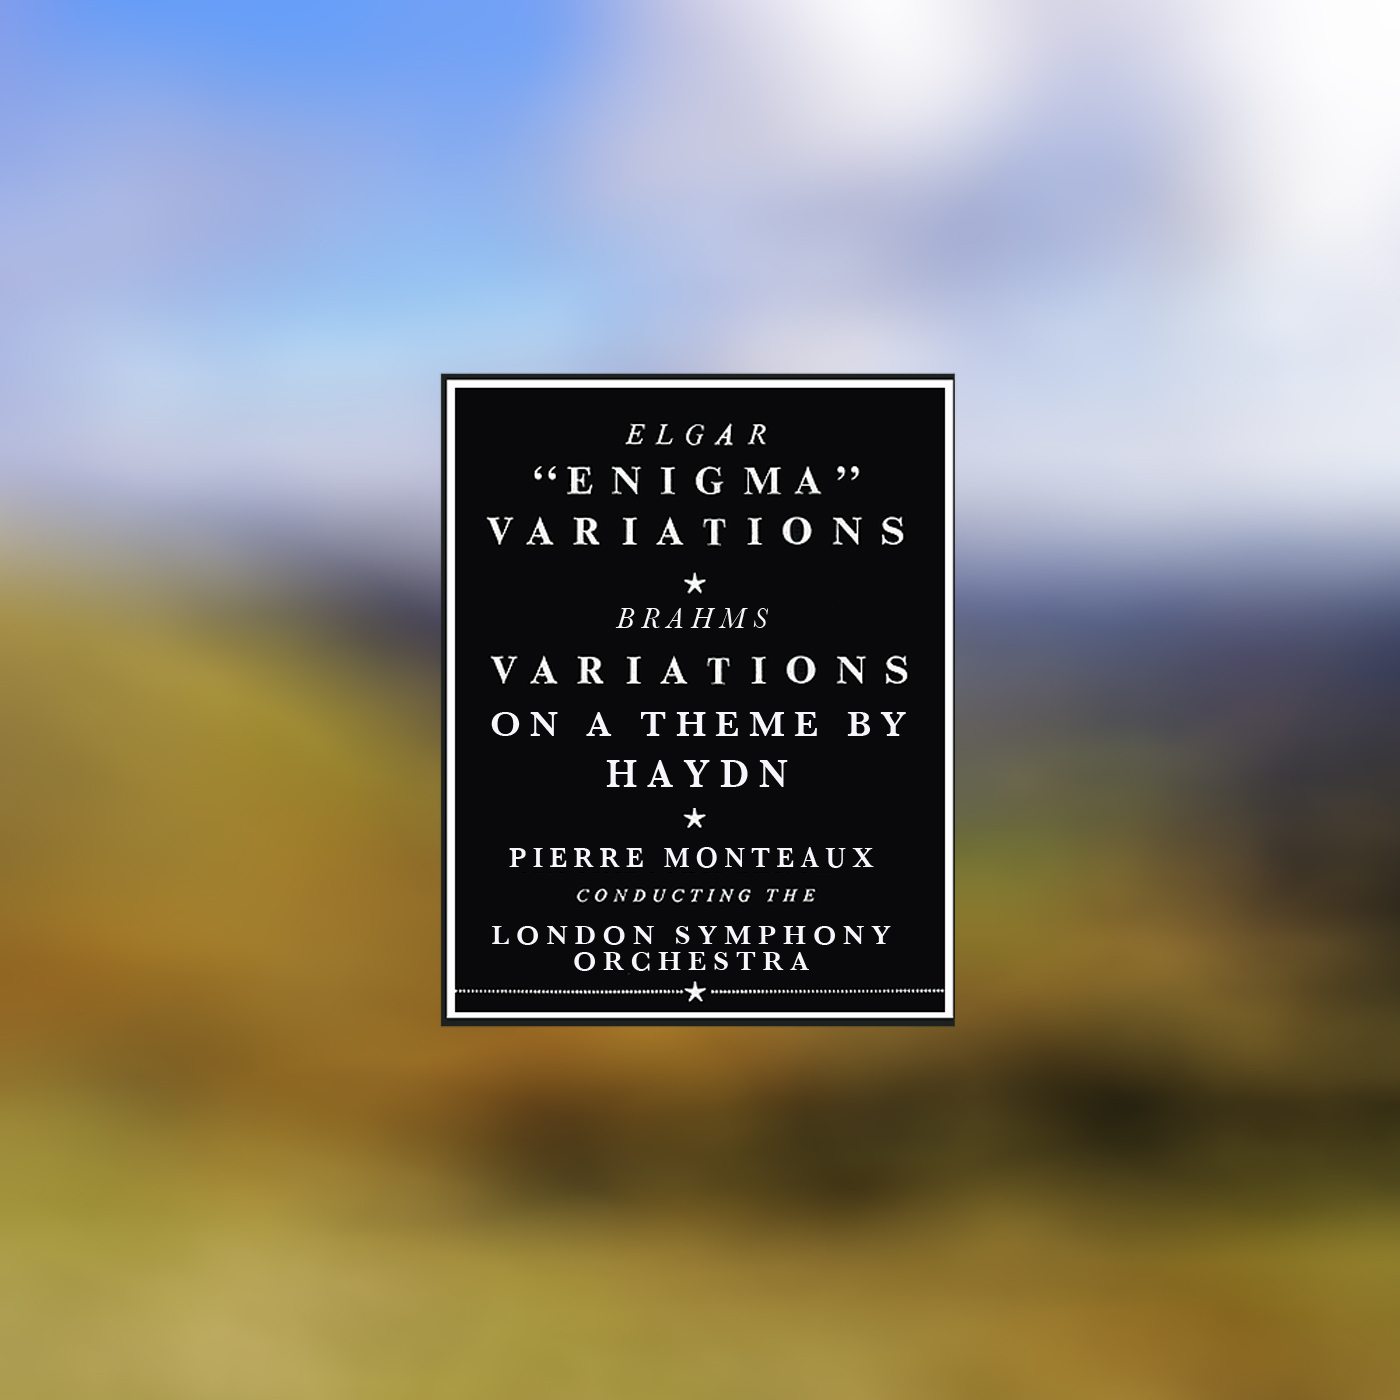 Variations On an Original Theme, Op. 36  "Enigma": V. R.P.A - Moderato